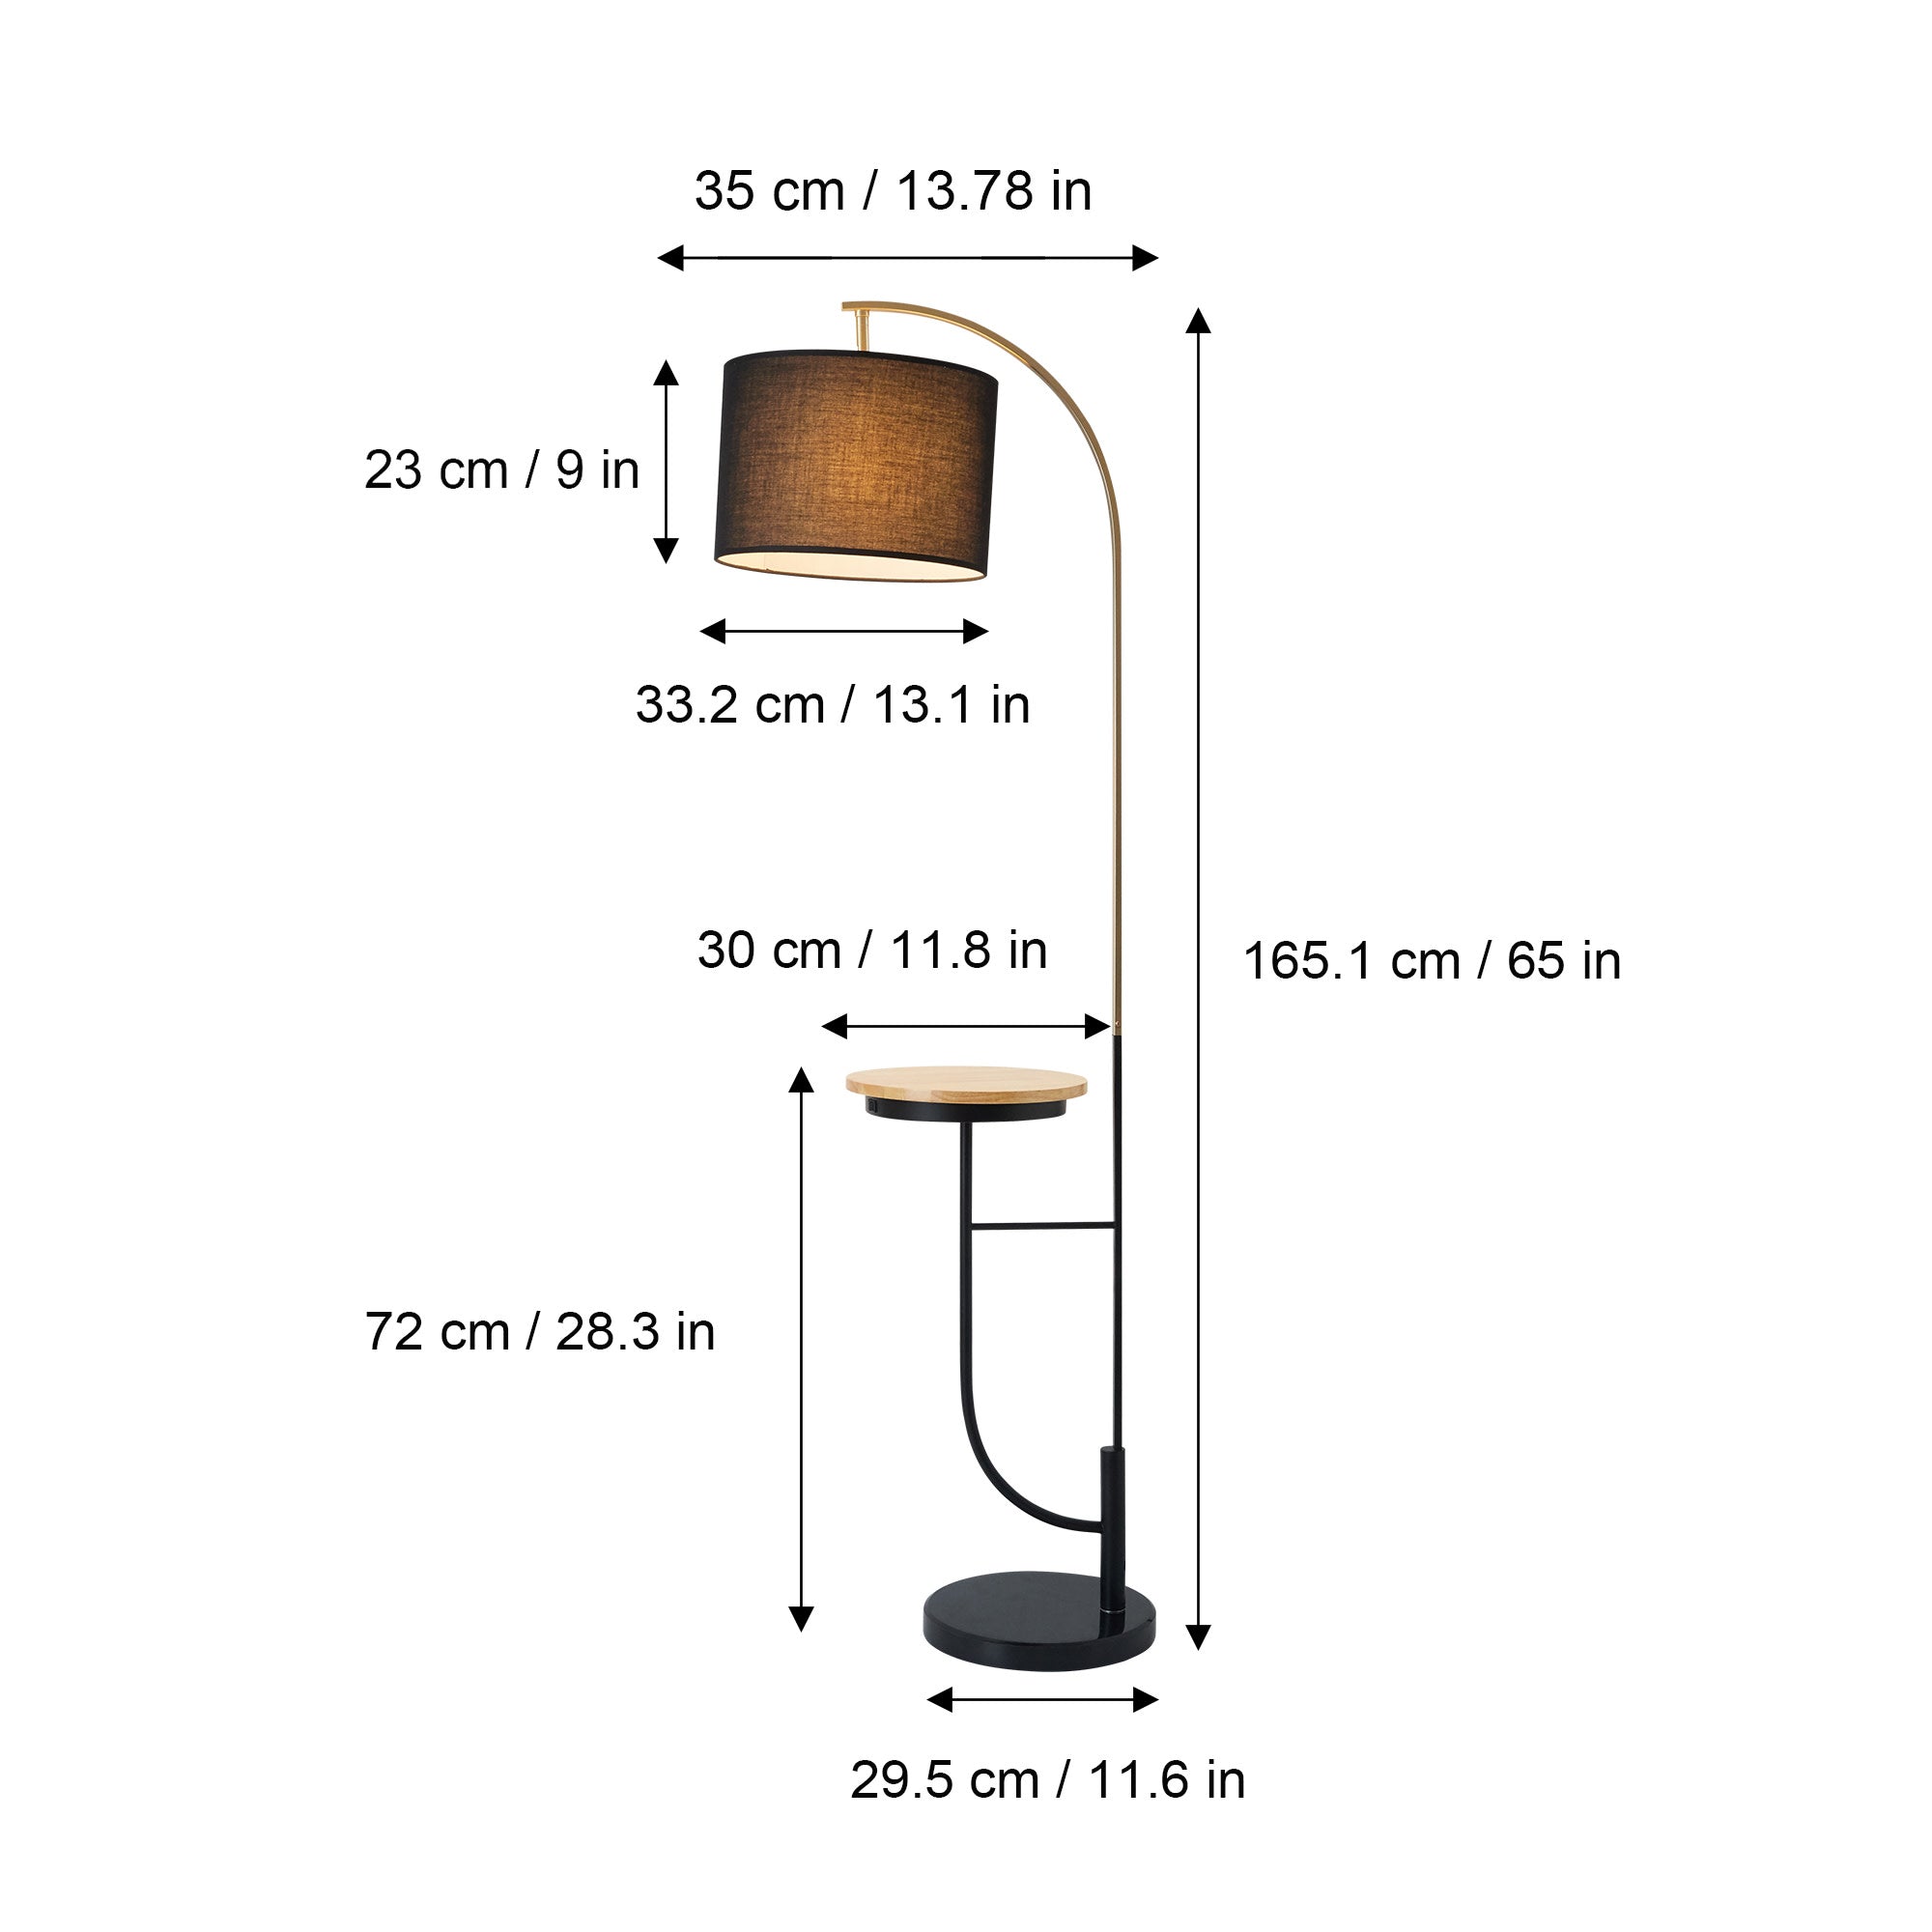 Teamson Home Danna 65" Modern Metal Arc Floor Lamp with Marble Base, Built-In Table, and USB Port, Black